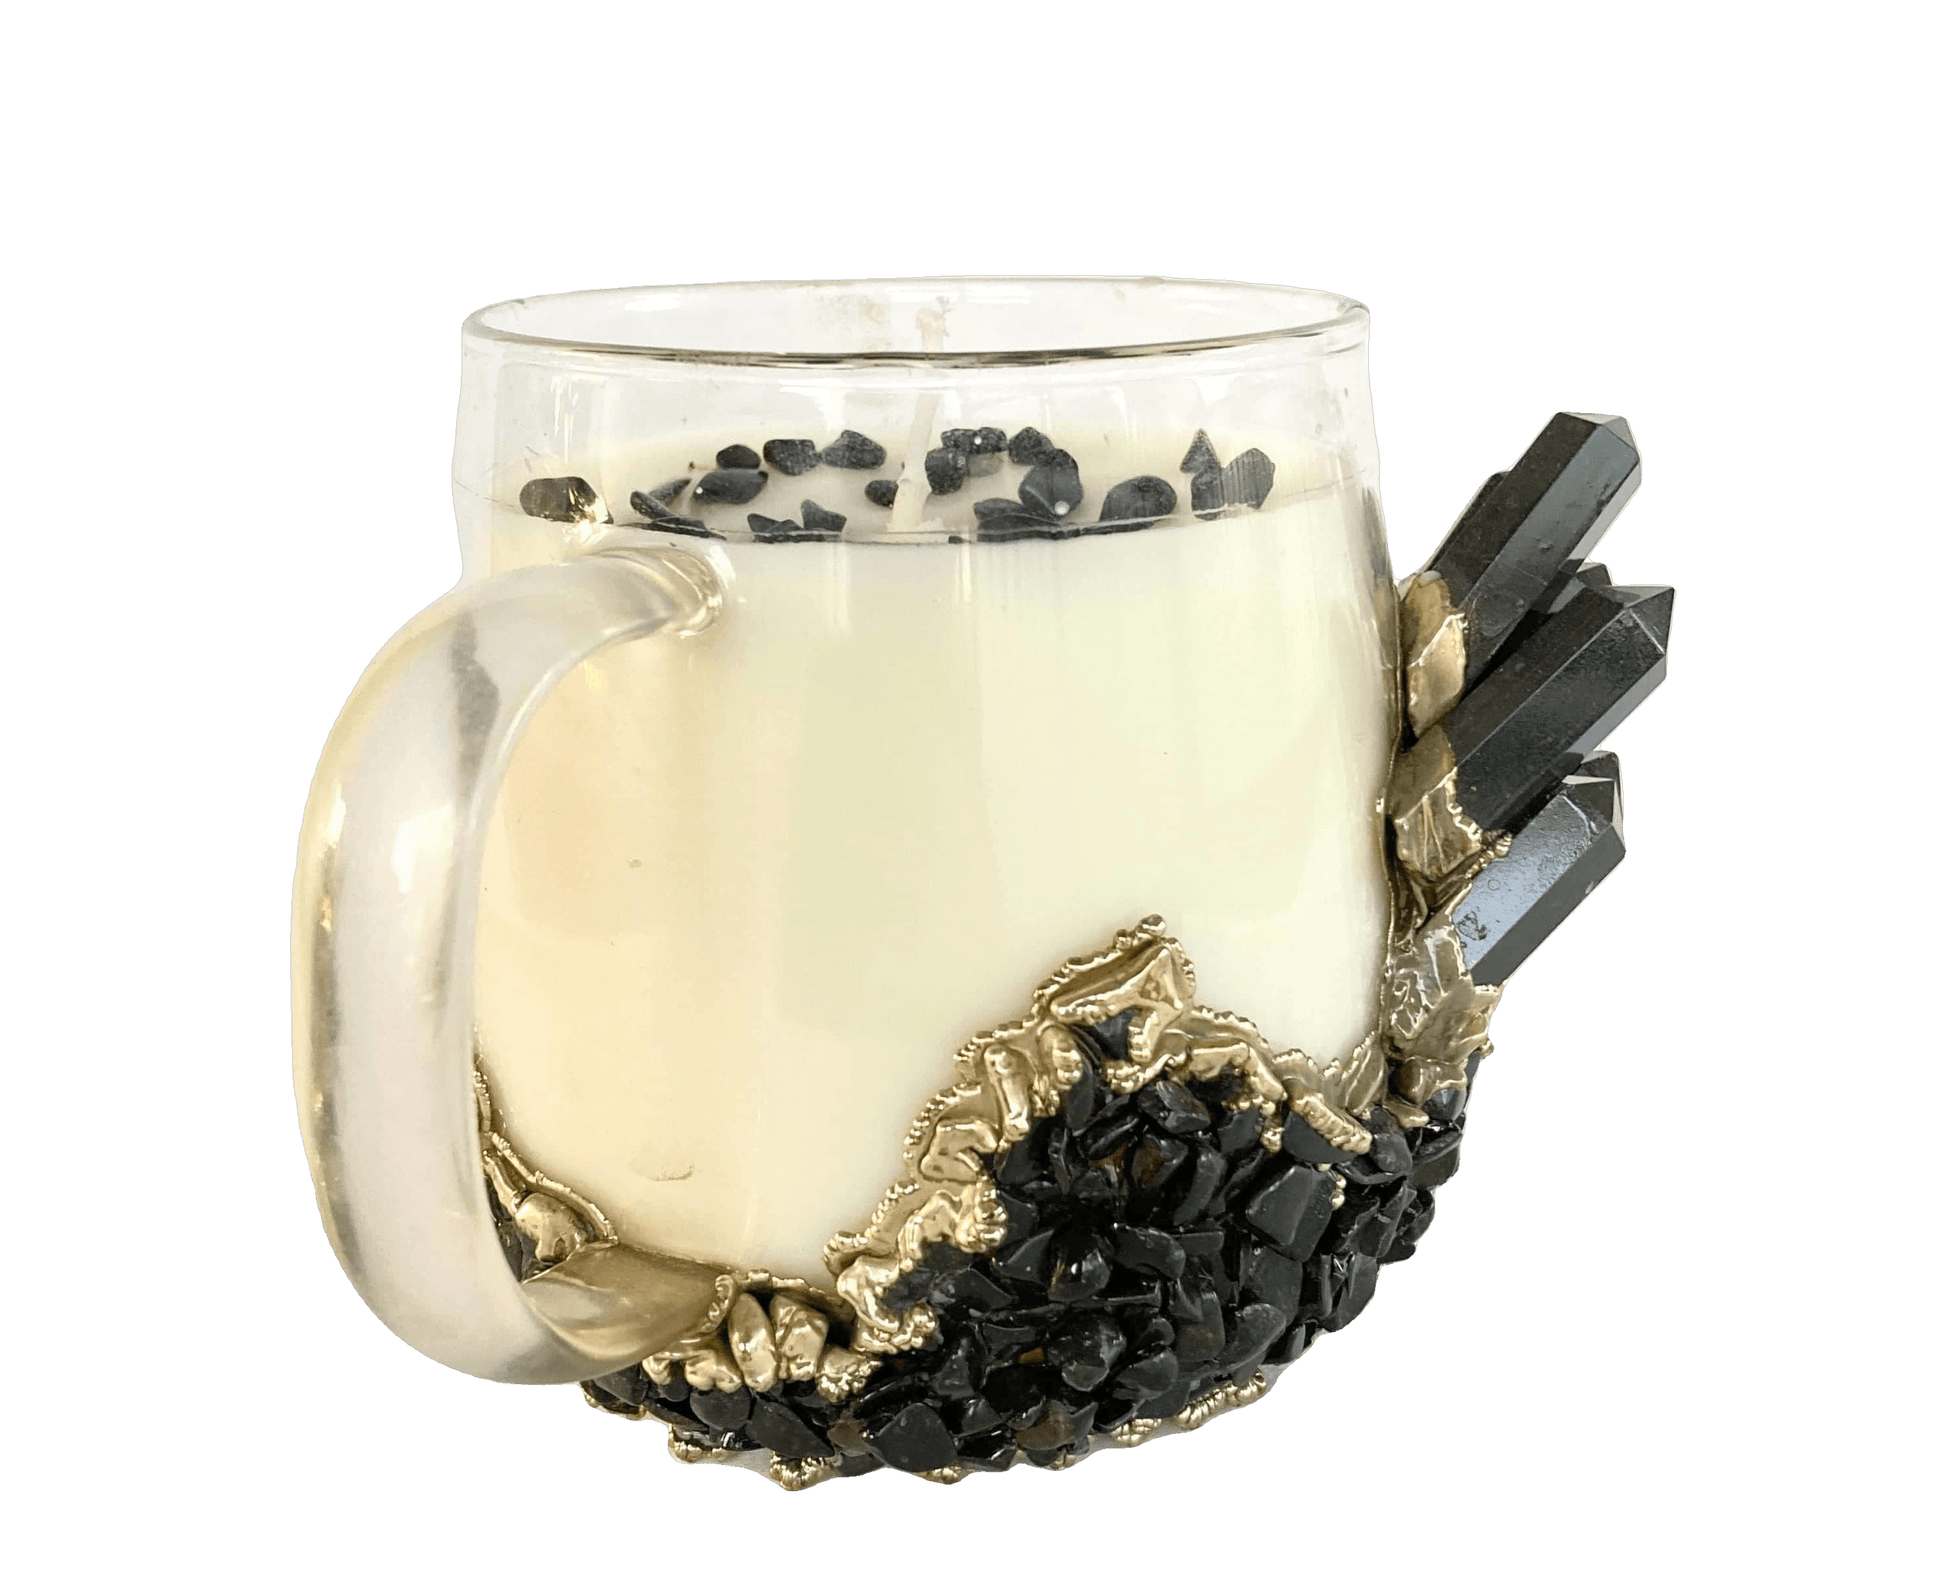 Black Agate Quartz Crystal Scented Soy Candles in Glass Mug - Set of 2 - MAIA HOMES